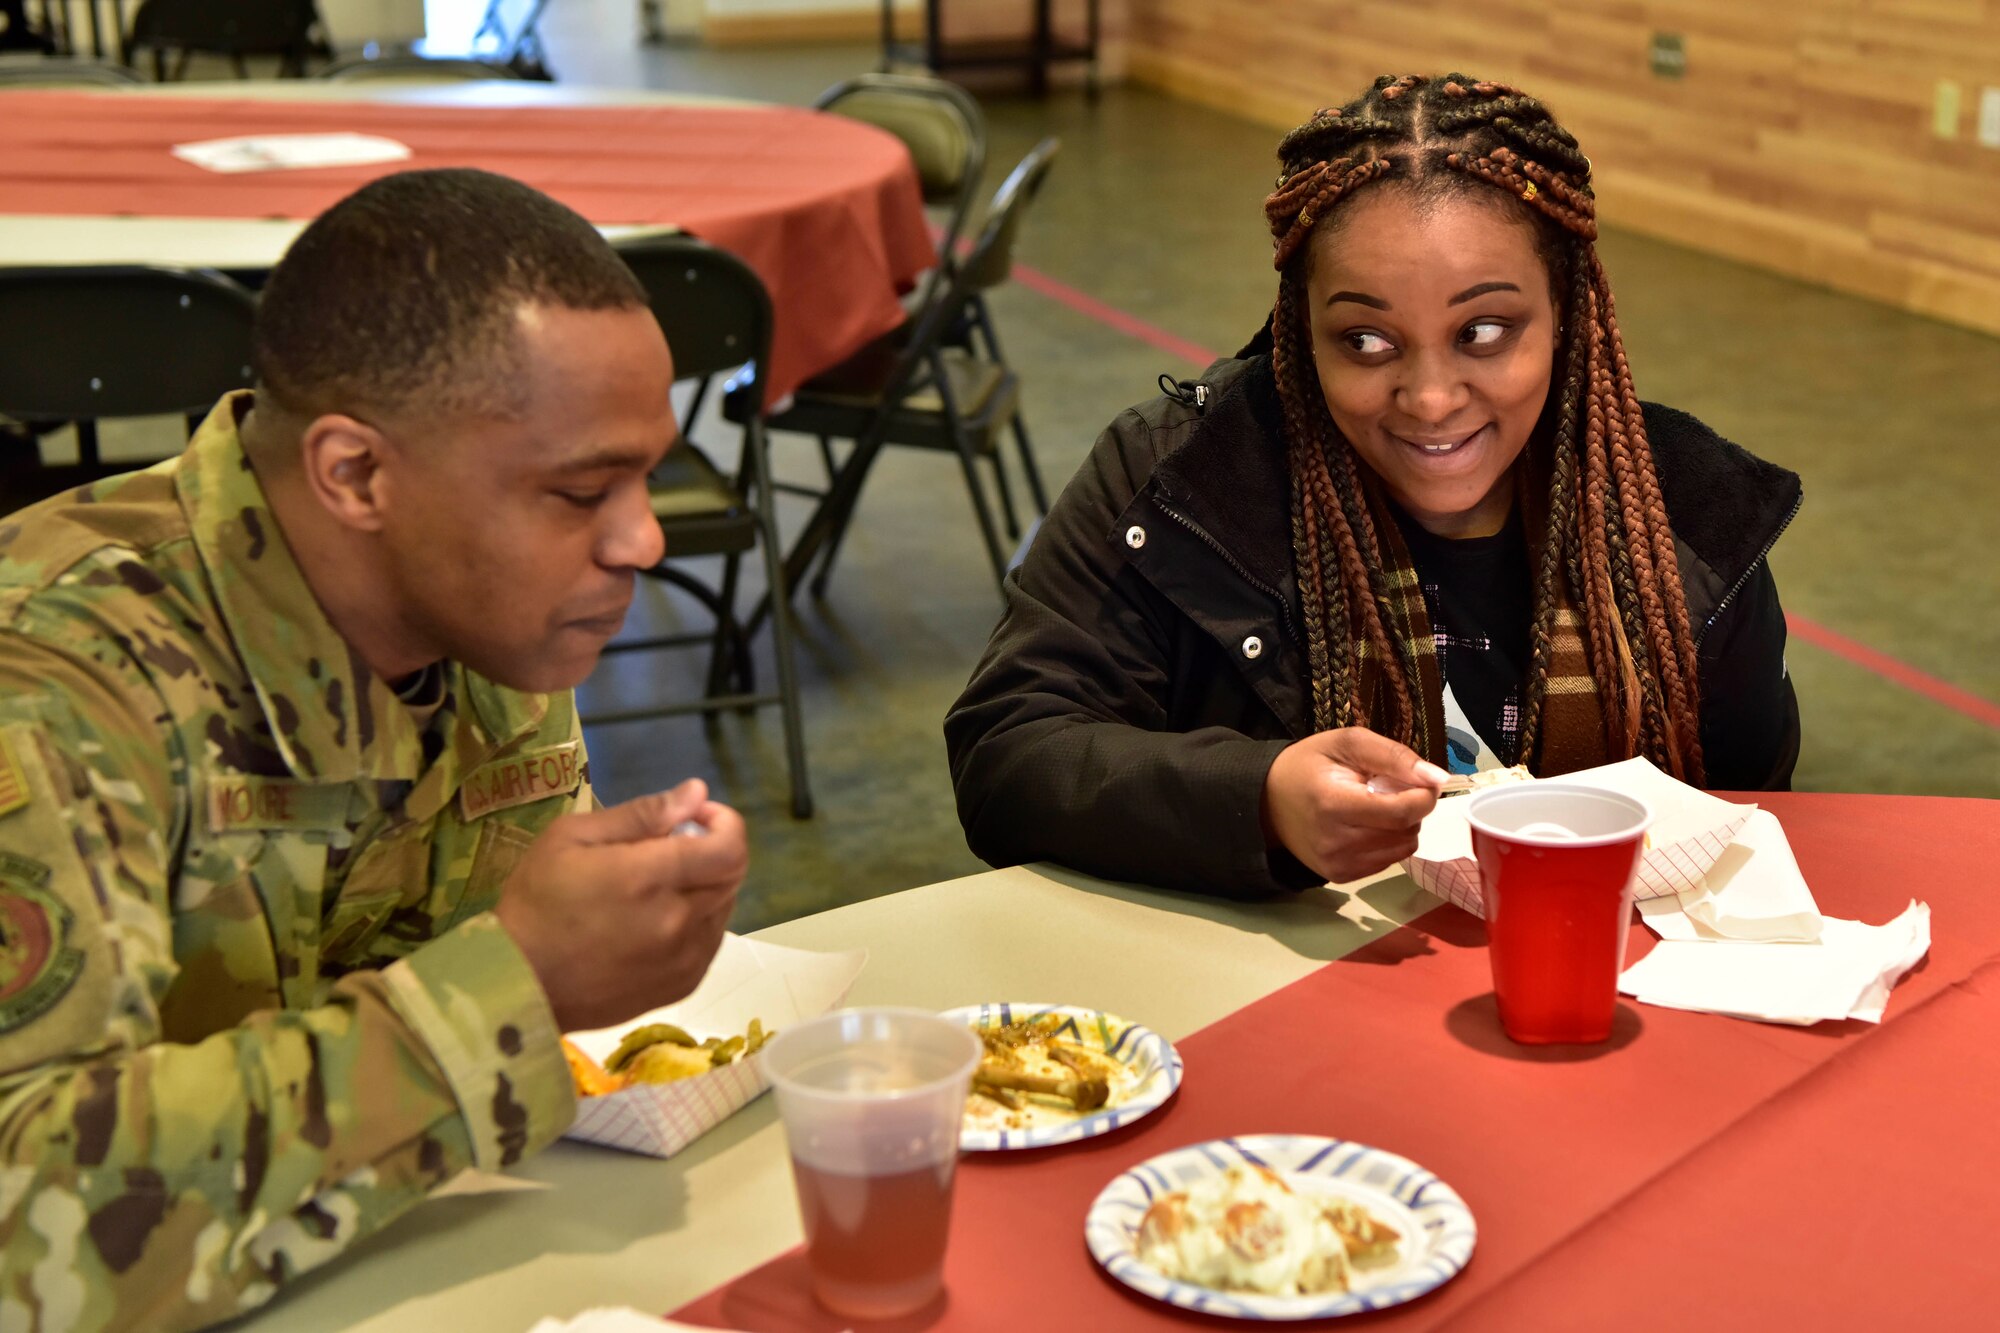 Airmen enjoy chicken curry with red beans and rice during A Taste of Culture event for Black History Month on Eielson Air Force Base, Alaska, Feb. 3, 2020. The event centered around Airmen tasting different African American dishes. (U.S. Air Force photo by Senior Airman Beaux Hebert)